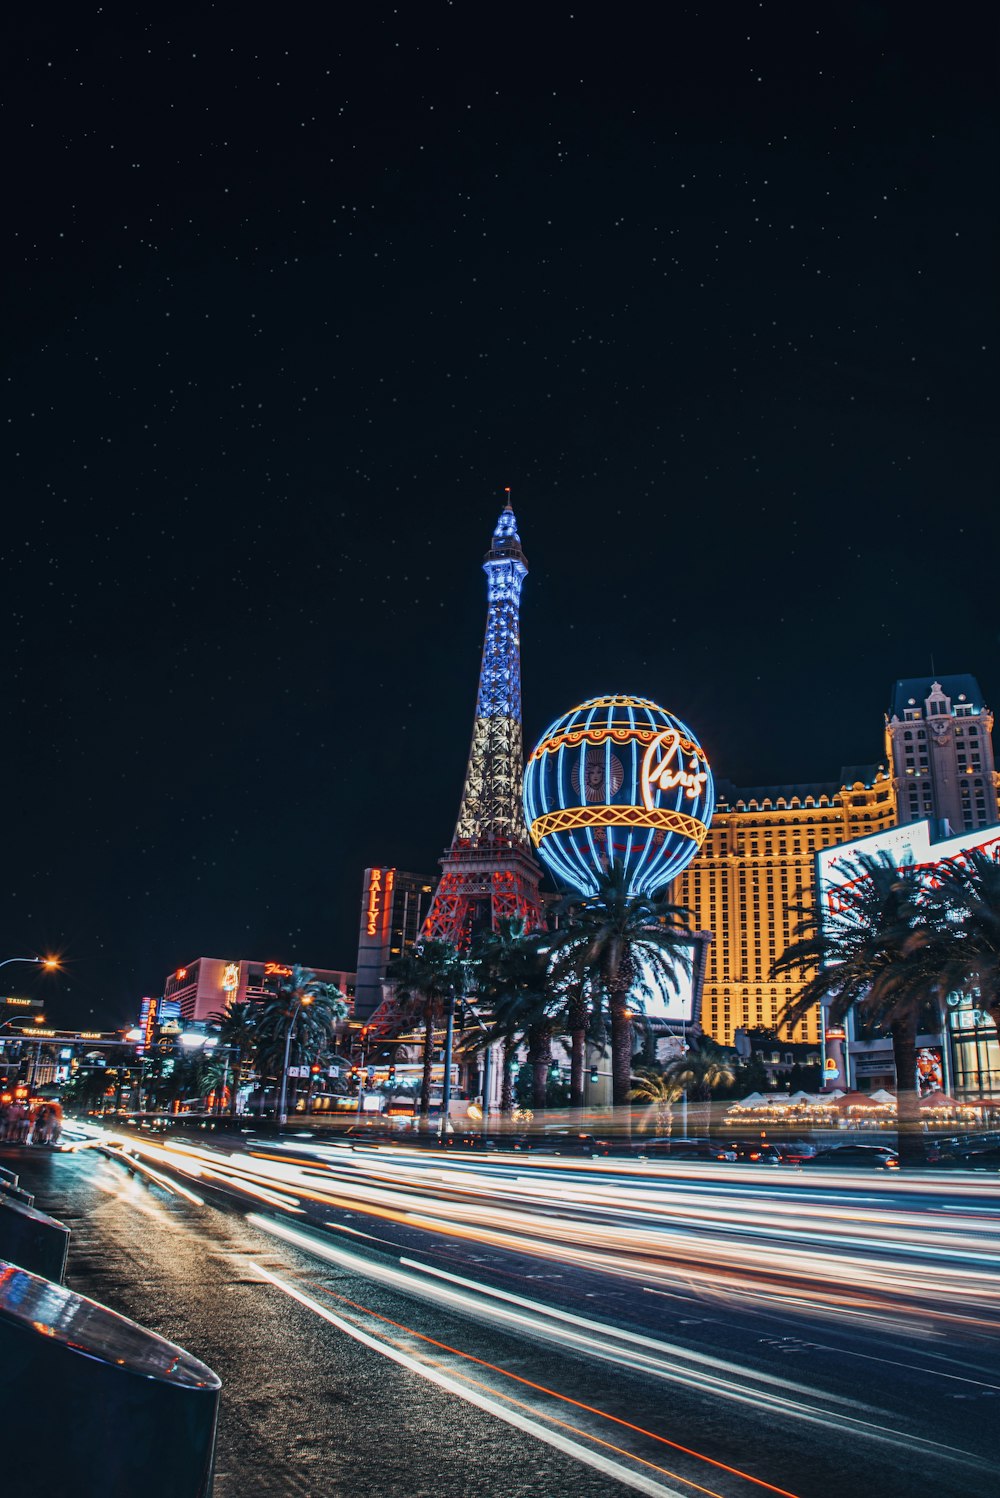 The las vegas strip at night with the eiffel tower in the background photo  – Free Las vegas Image on Unsplash